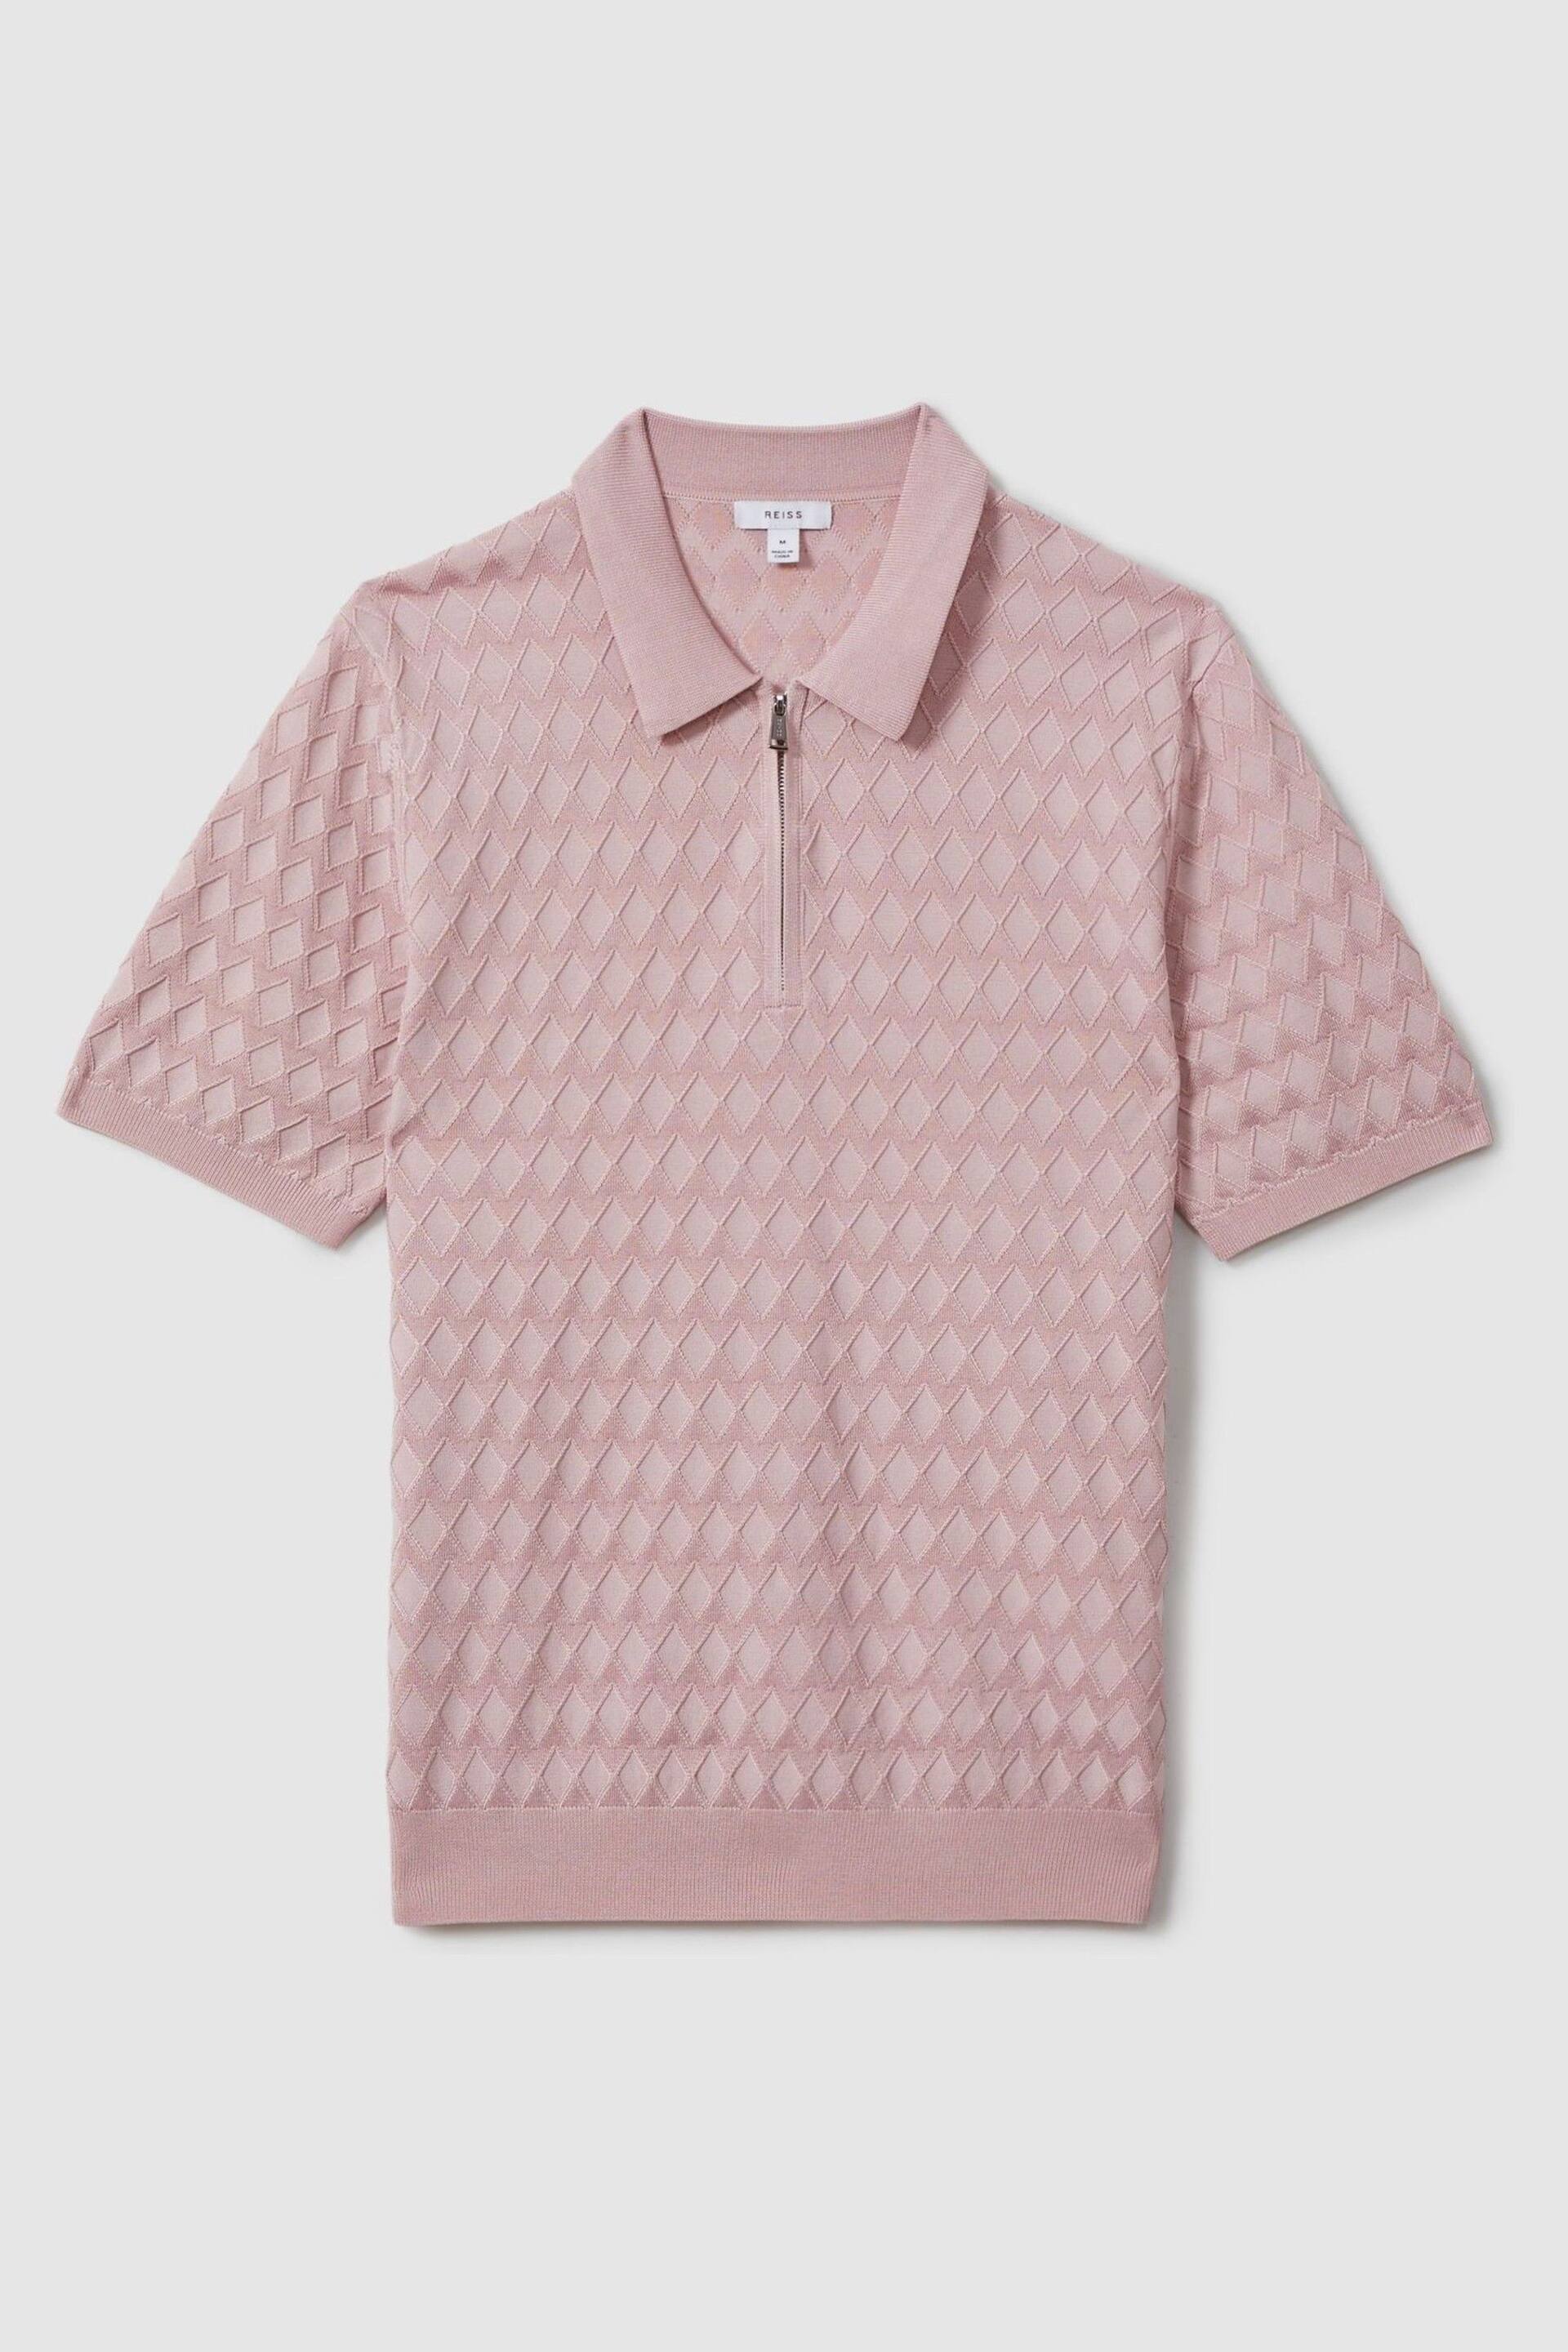 Reiss Soft Pink Rizzo Half-Zip Knitted Polo Shirt - Image 2 of 5